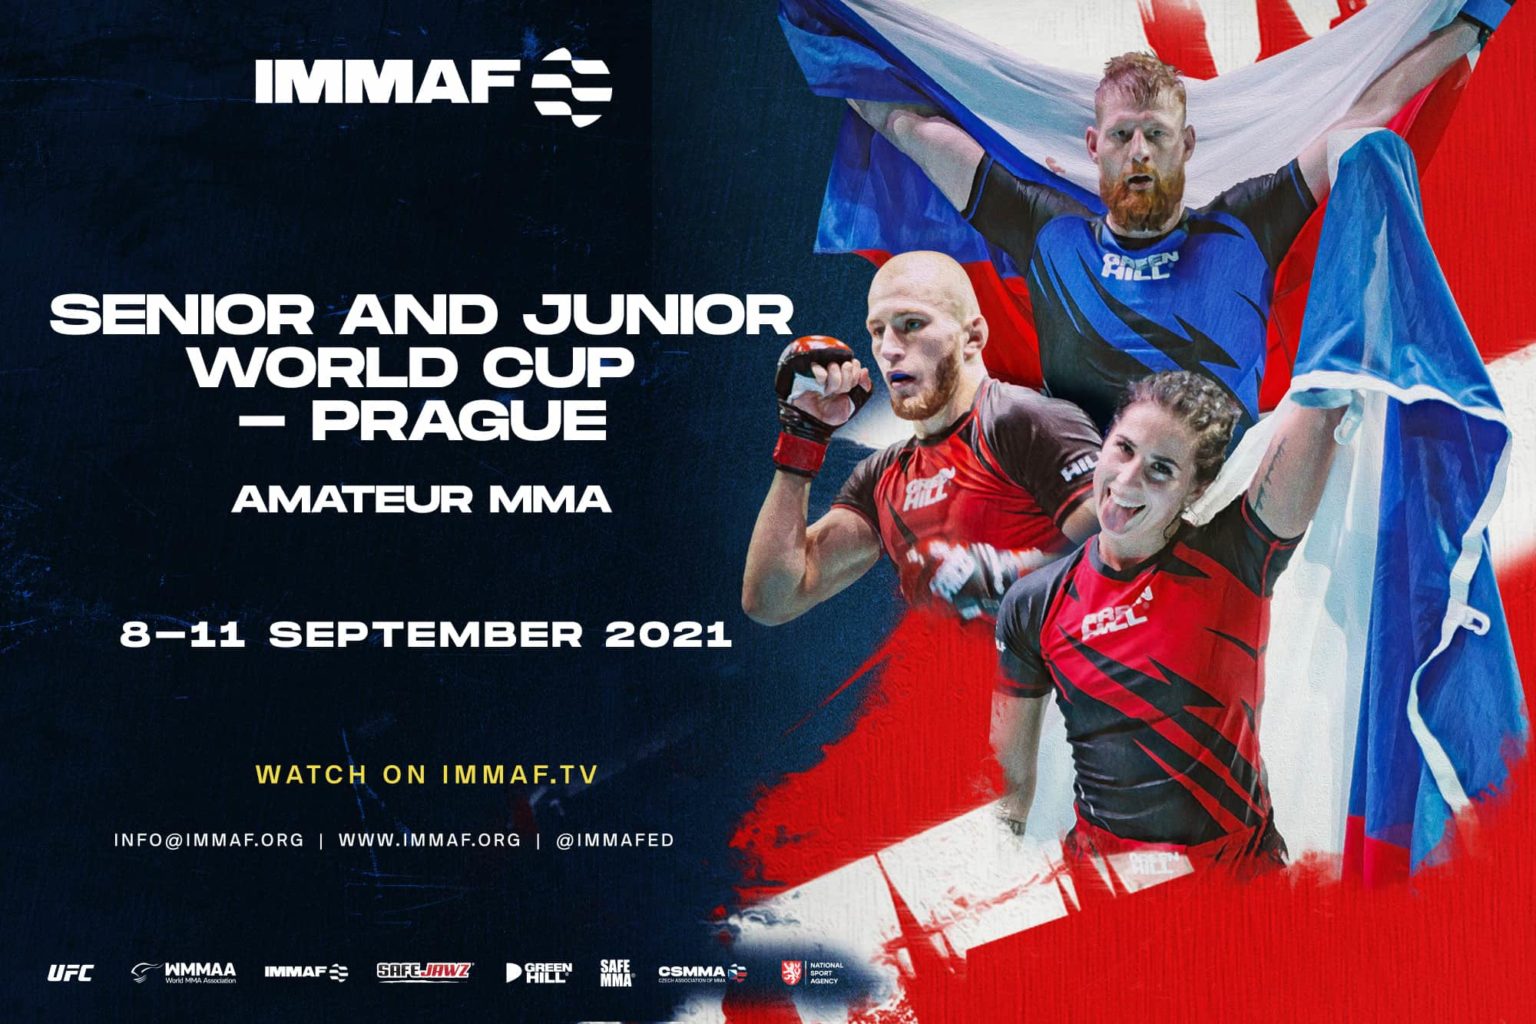 2018 IMMAF Africa Open will be the biggest to date, event